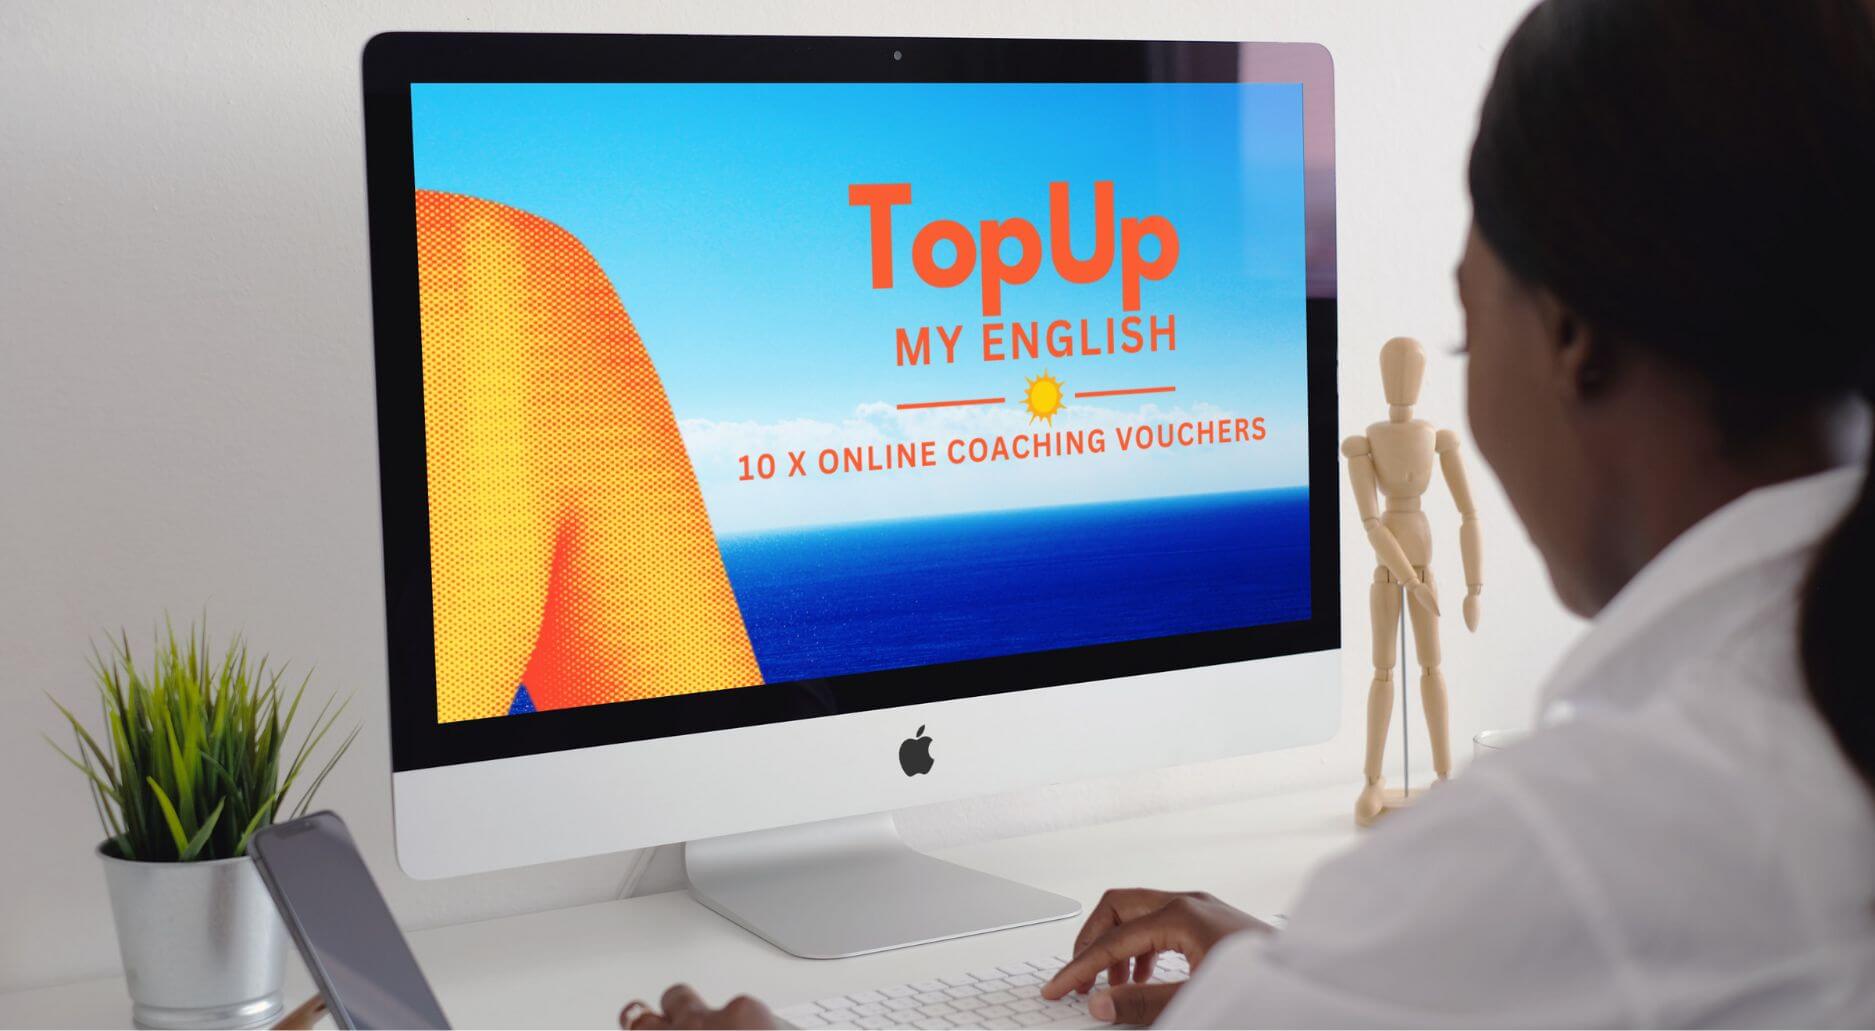 top up my English girl on computer screen